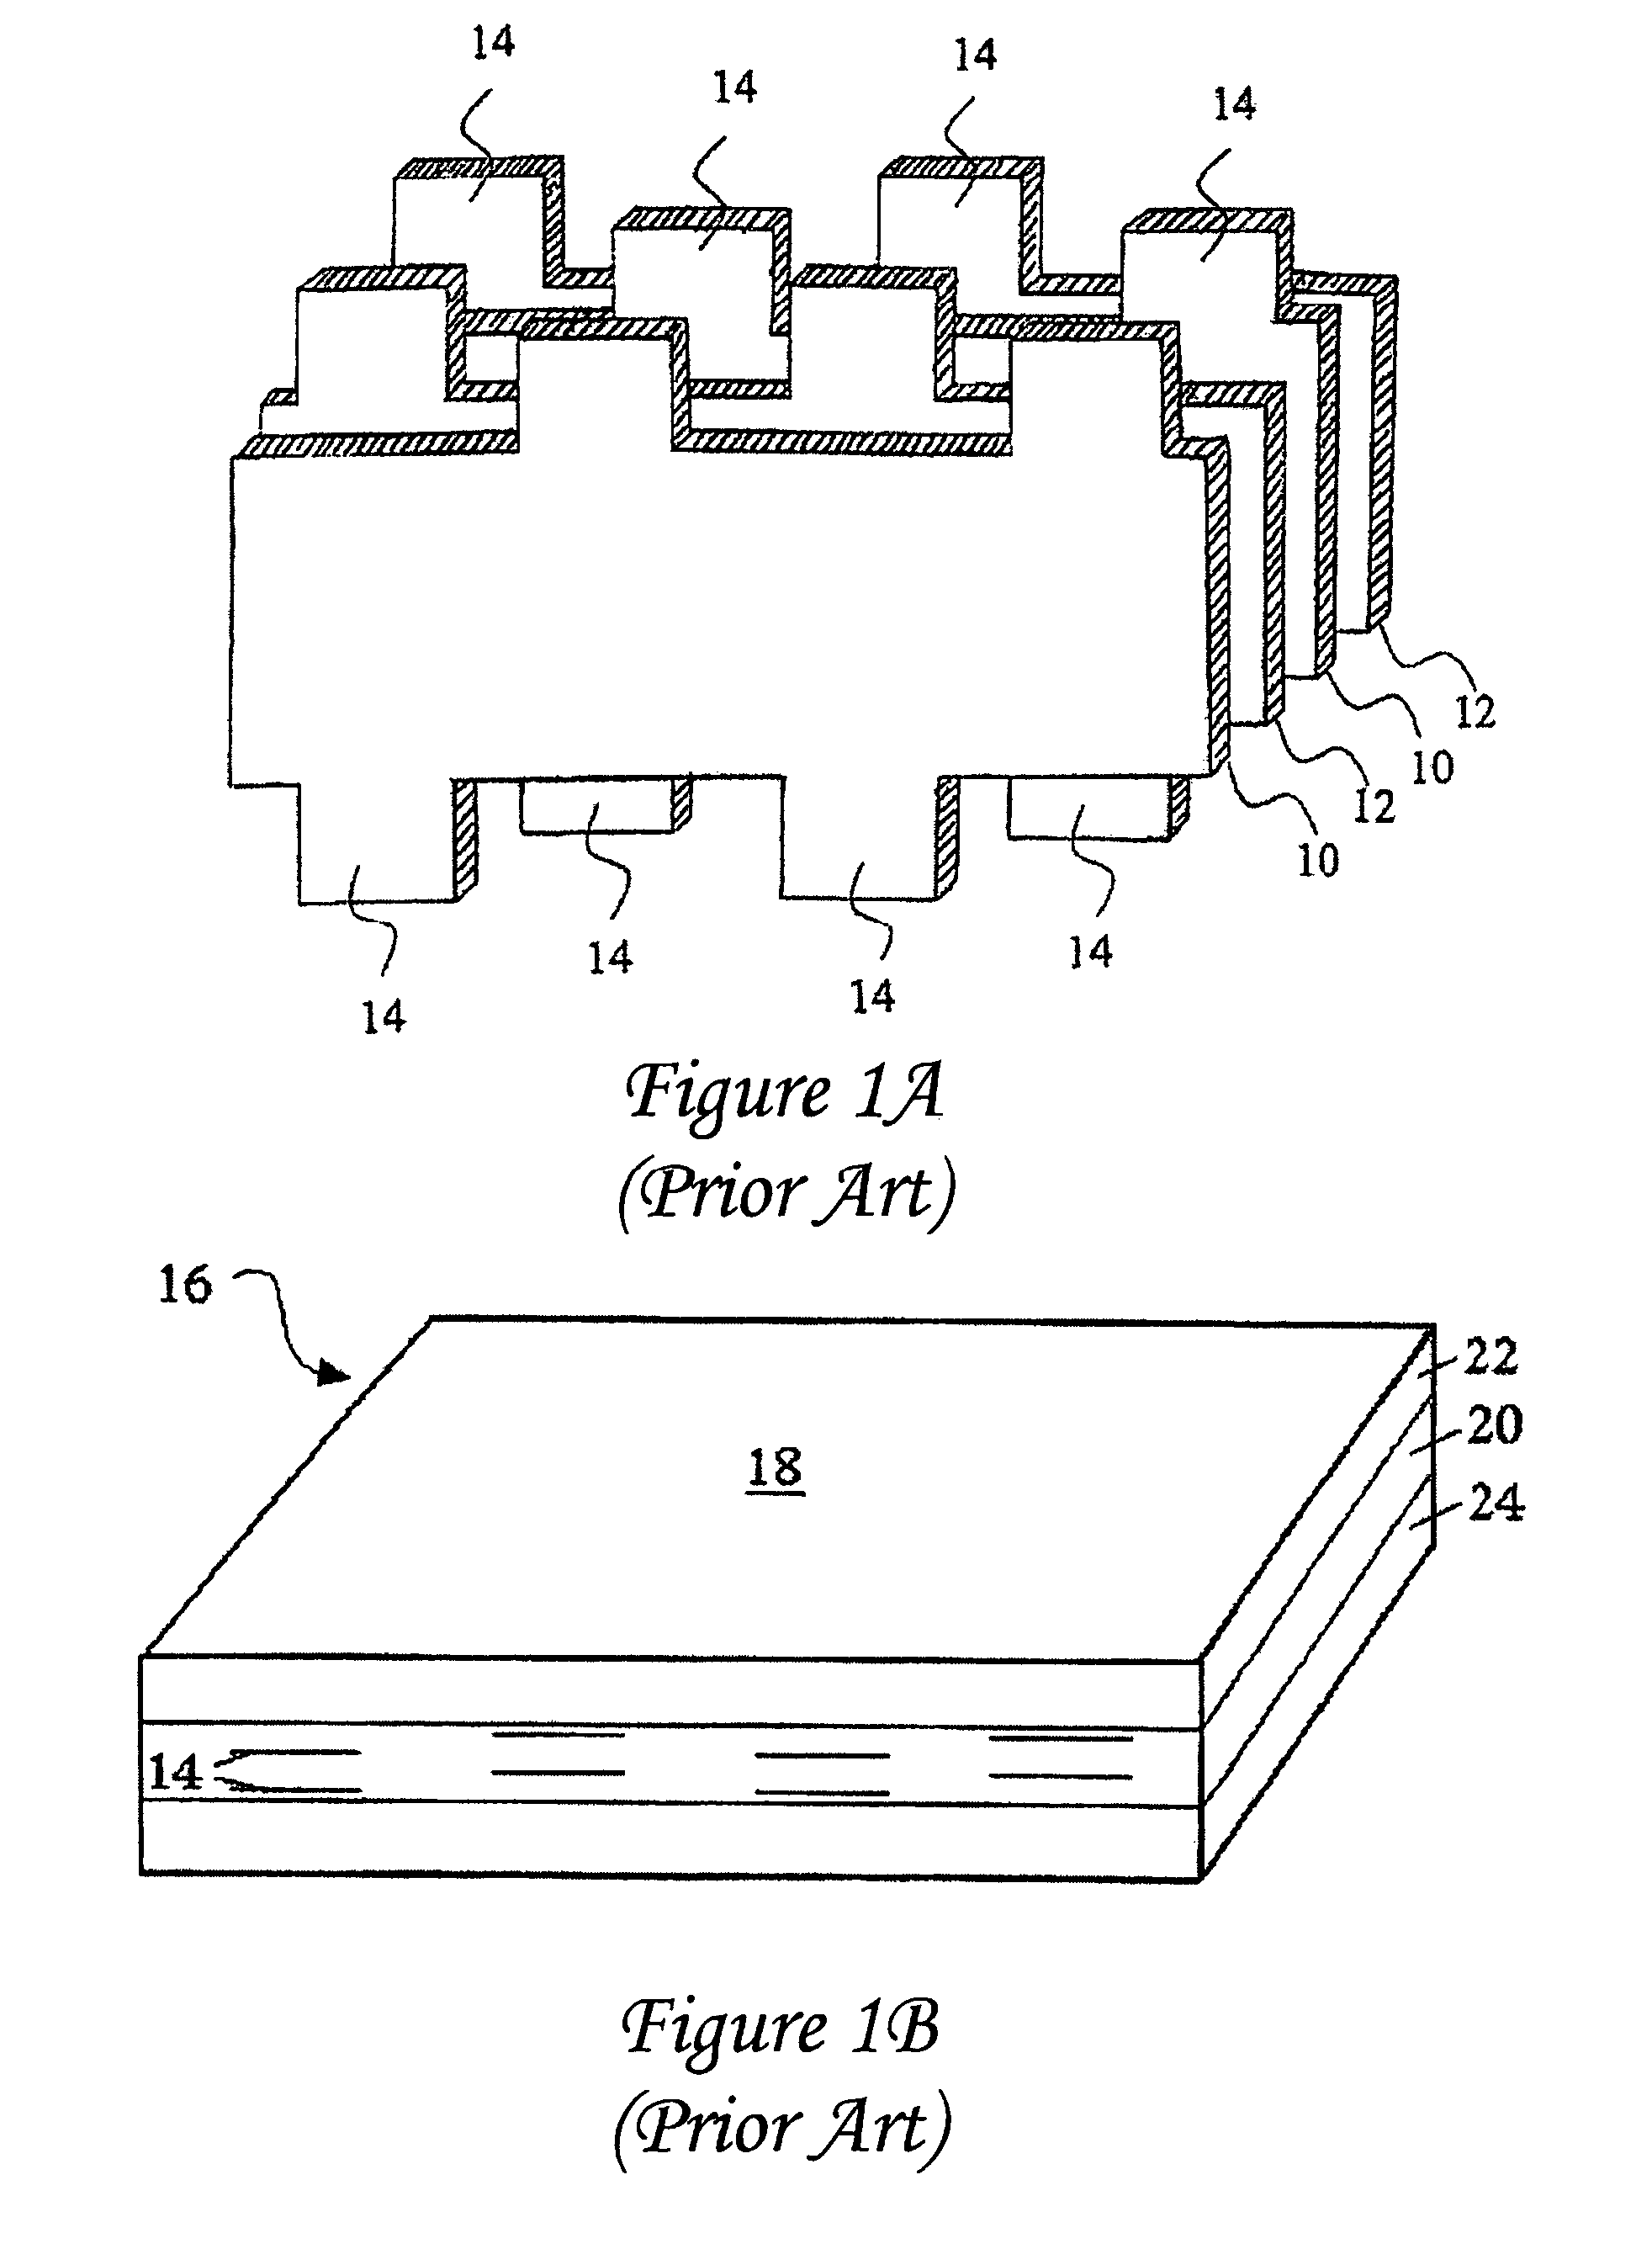 System and method of plating ball grid array and isolation features for electronic components